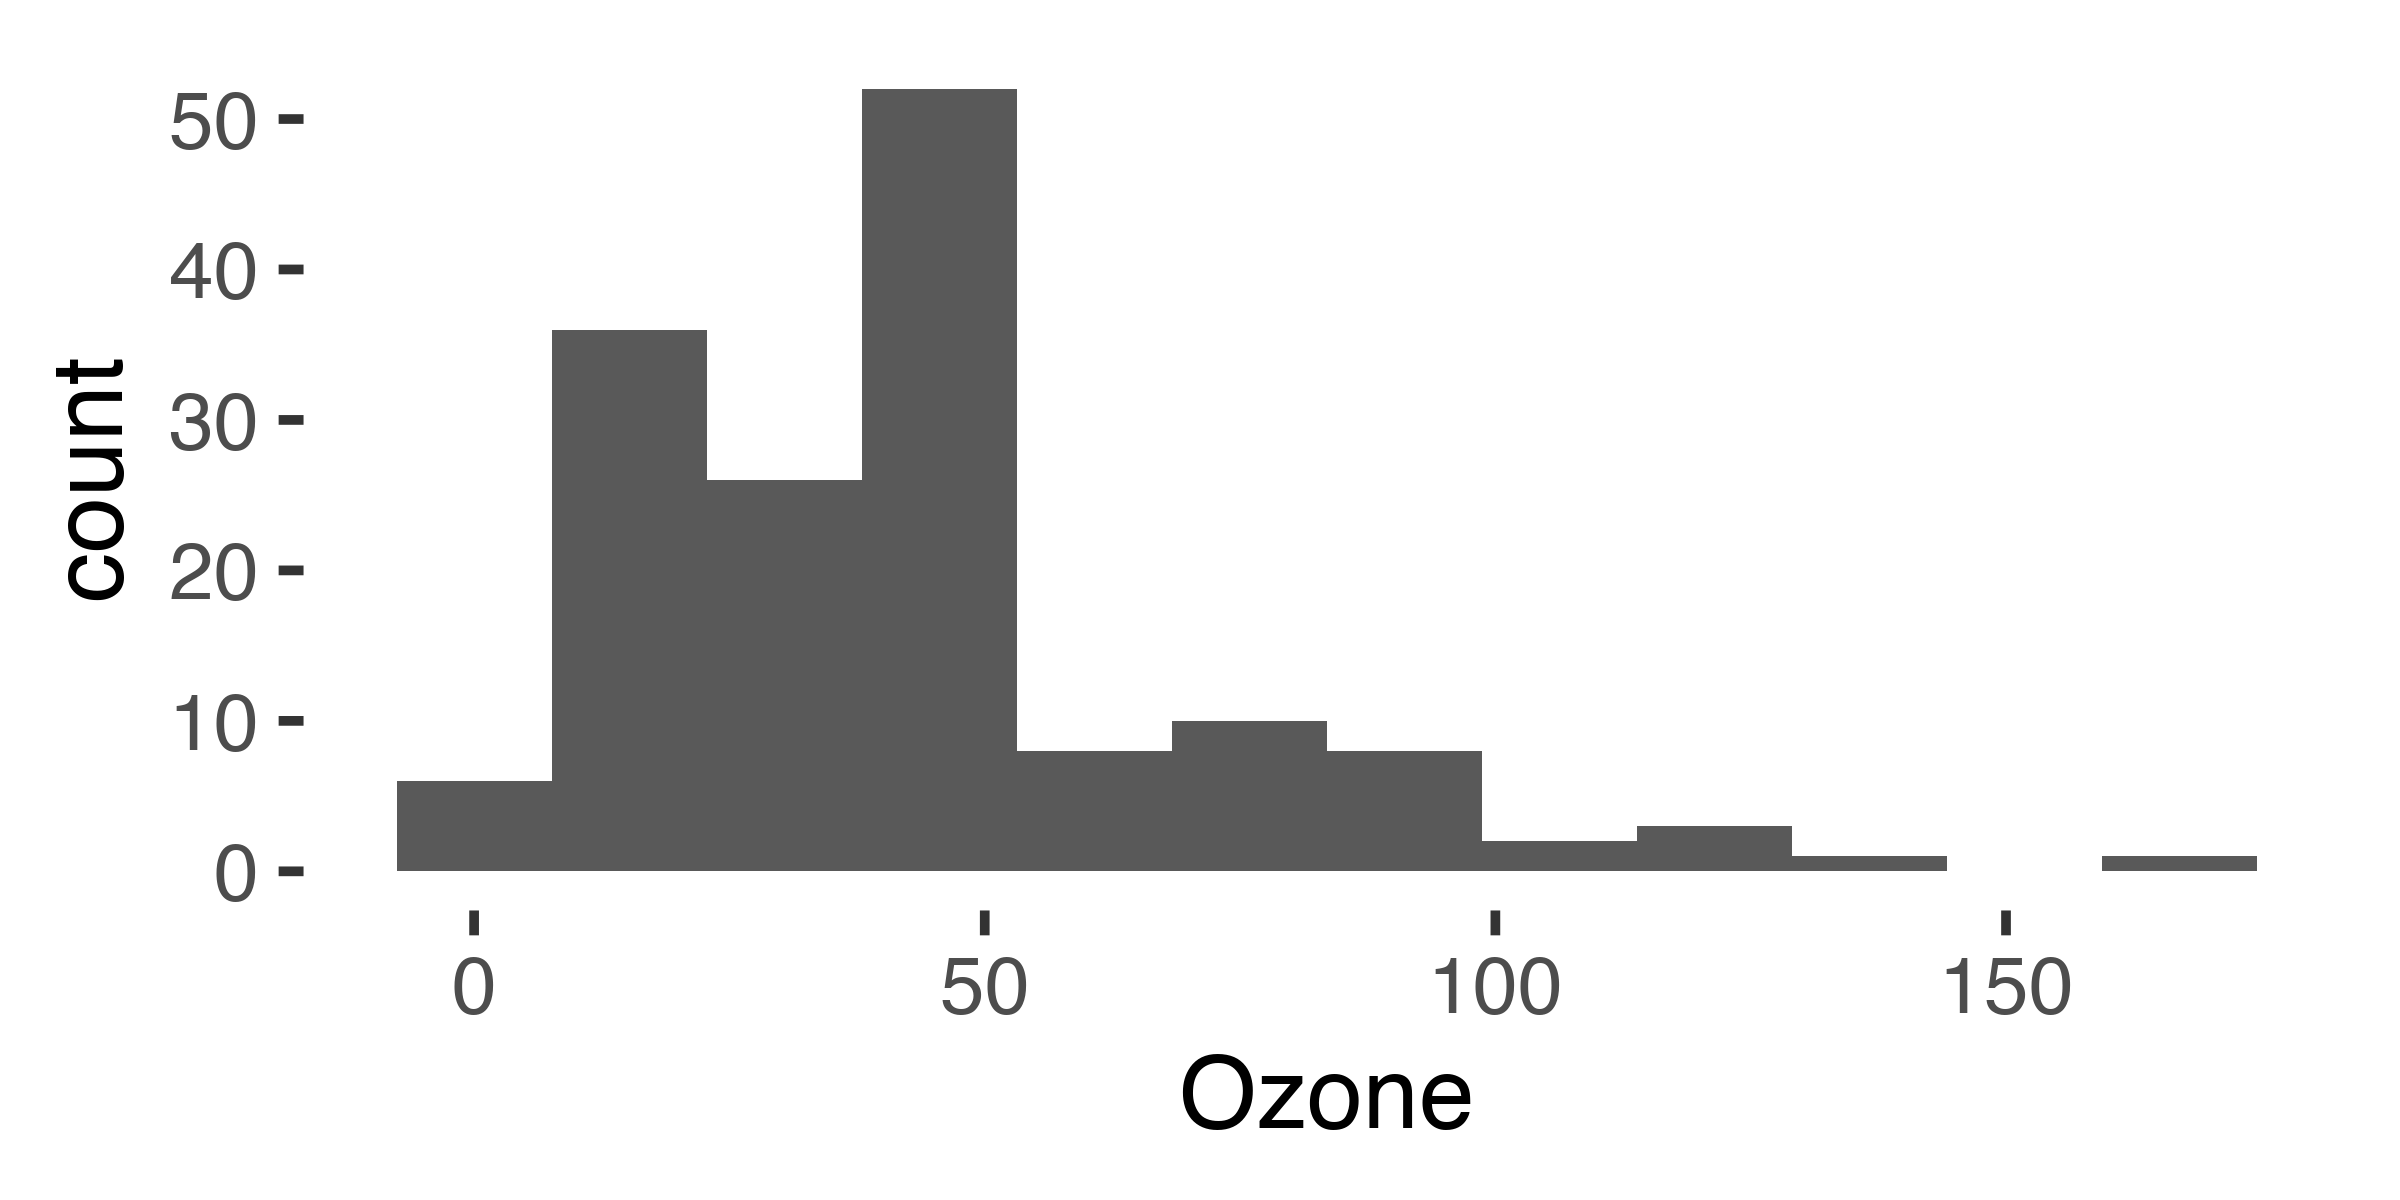 histogram of ozone readings from the airquality dataset in base R